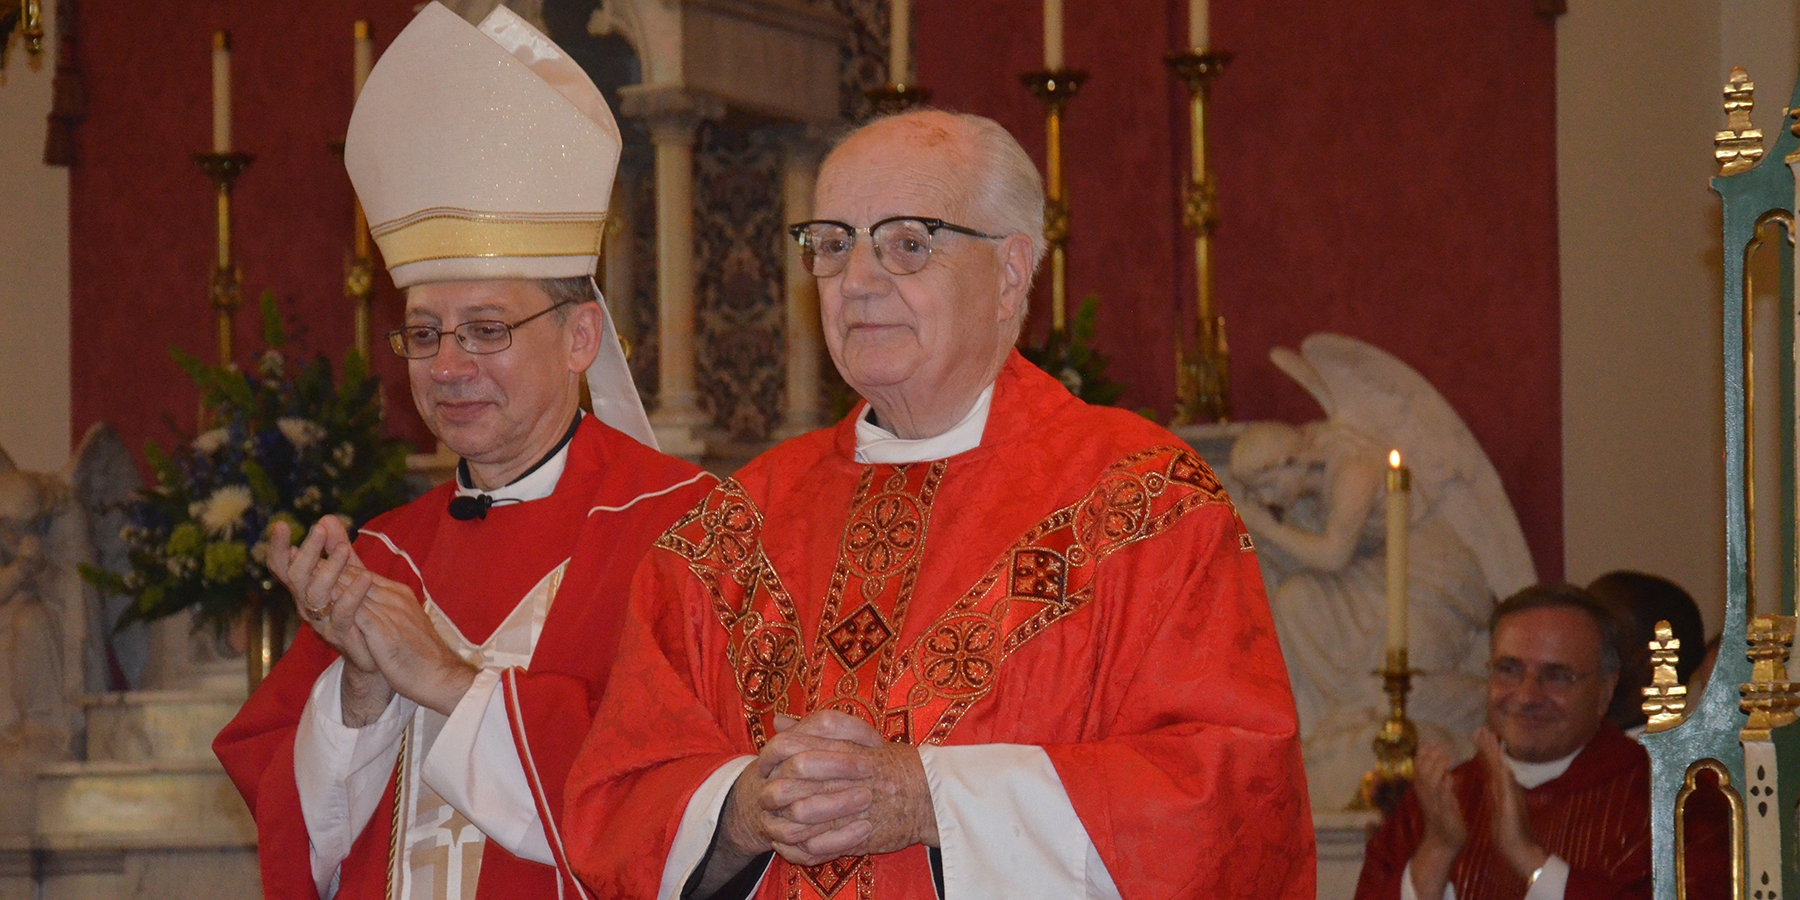 Bishop Barry Knestout and Msgr. Andrew Cassin